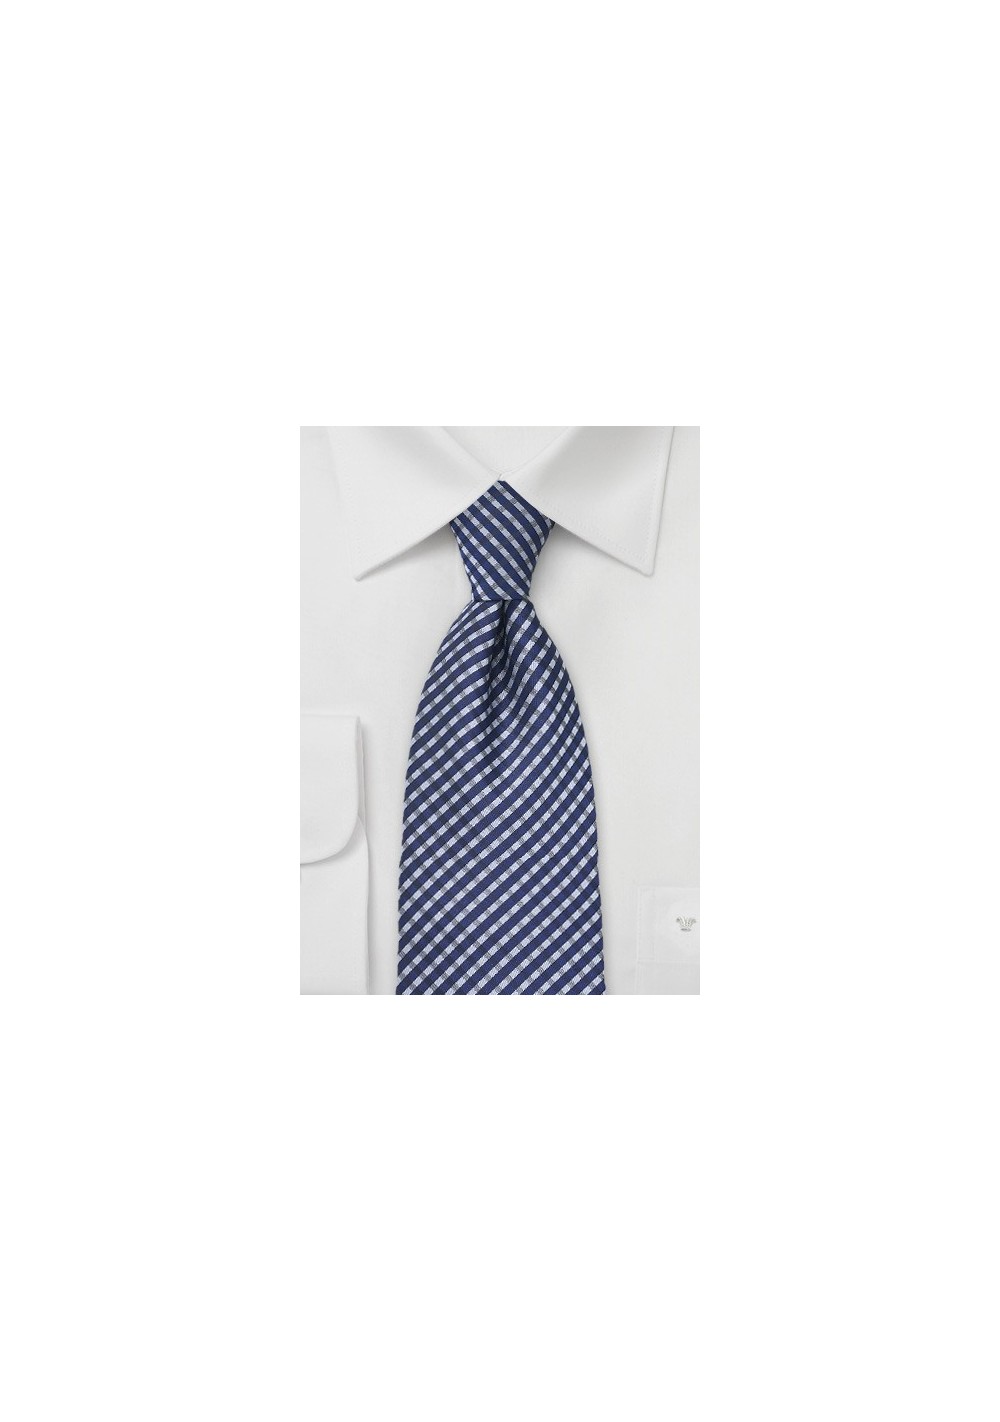 Plaid Tie in Navy and Silver